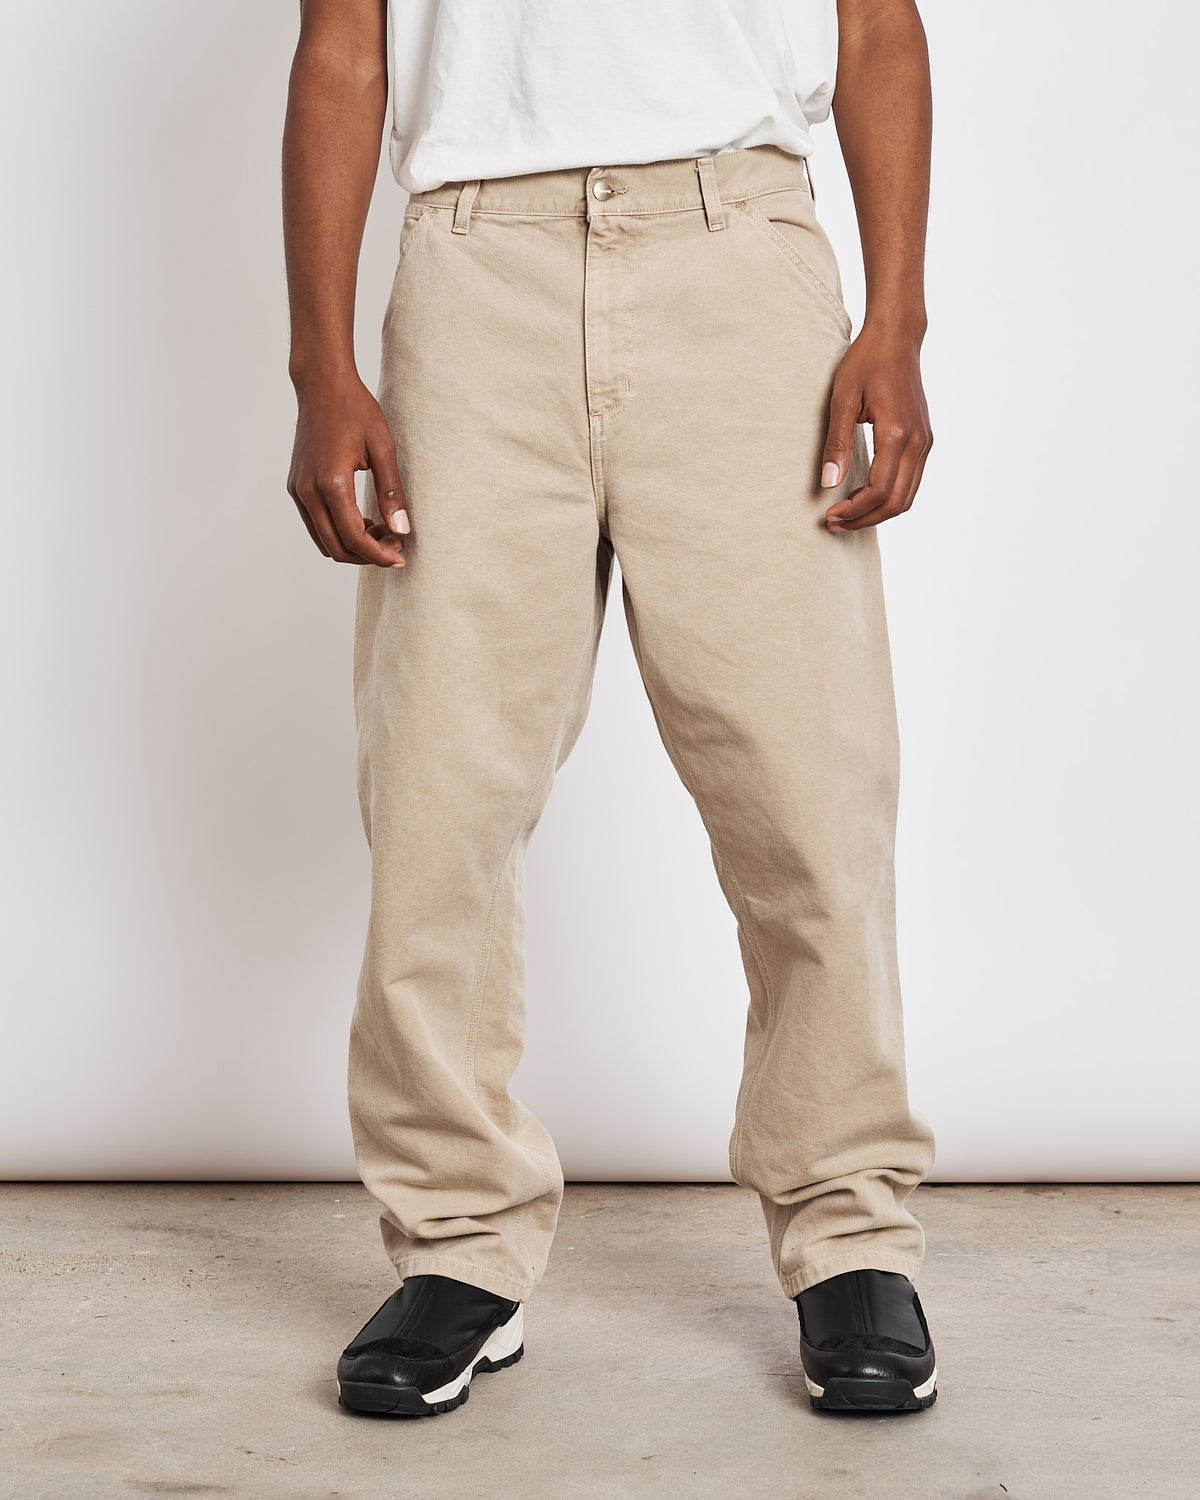 Single Knee Pant in Brown Carhartt WIP , Let the Fashion Statement